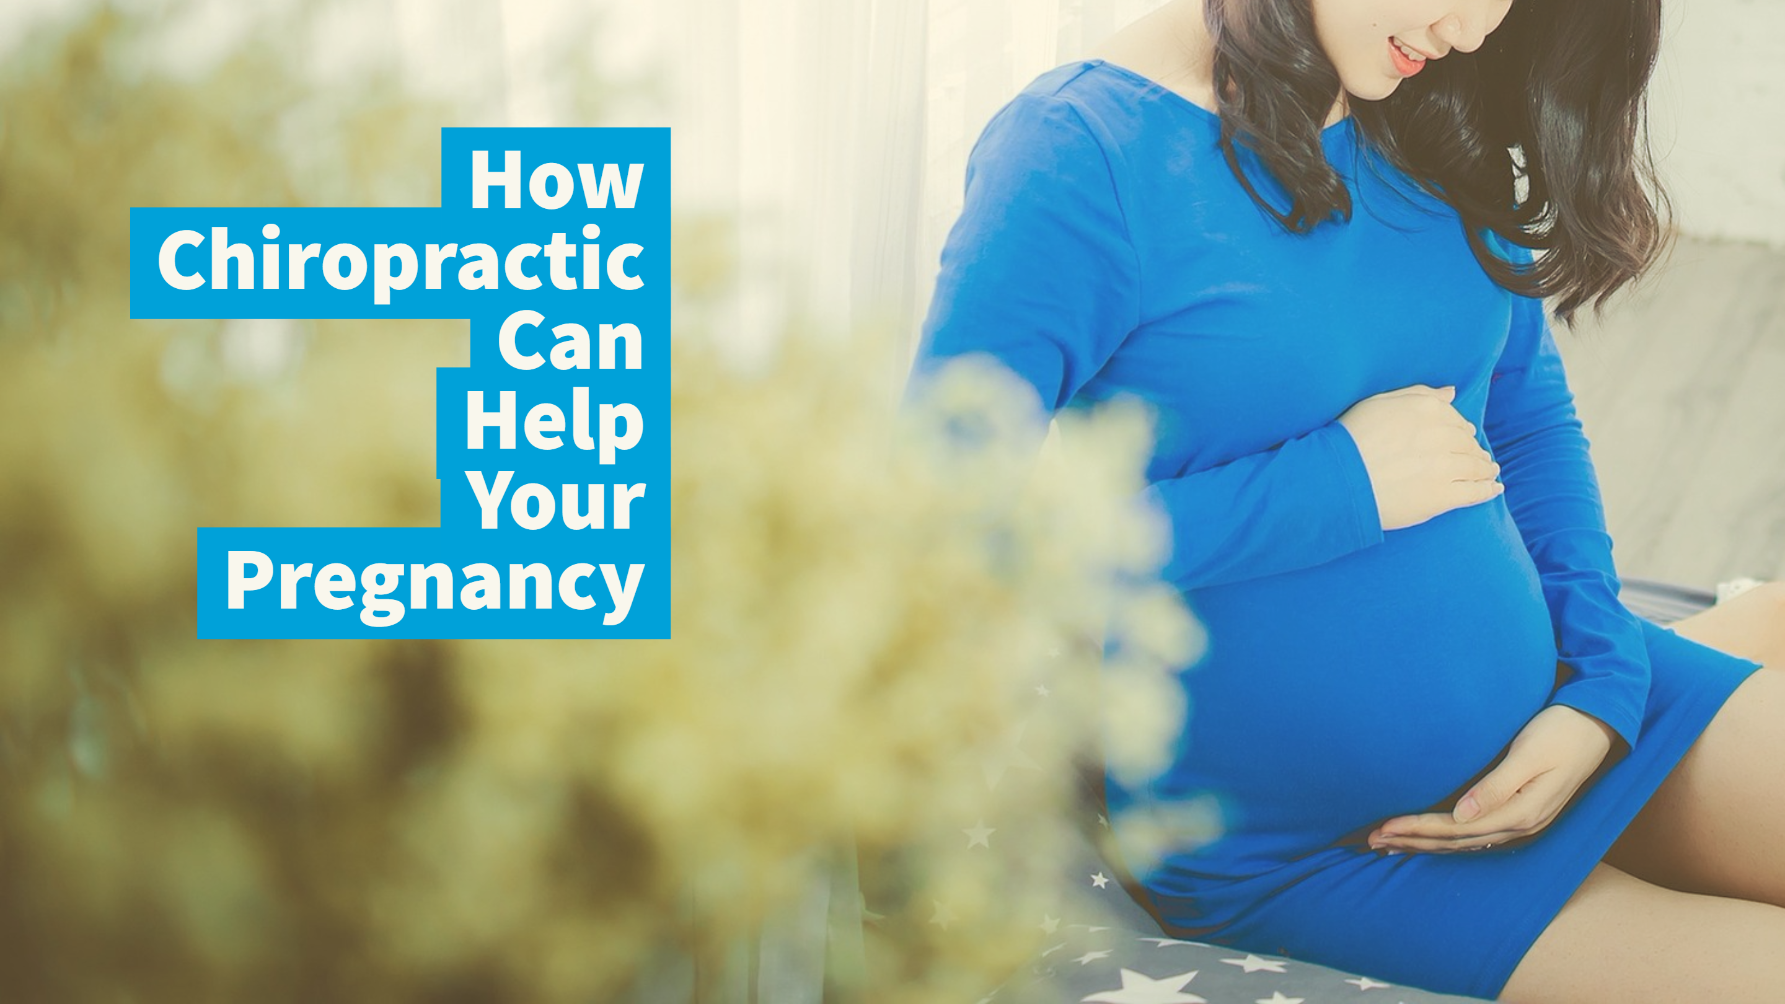 How Chiropractic Can Help During Pregnancy